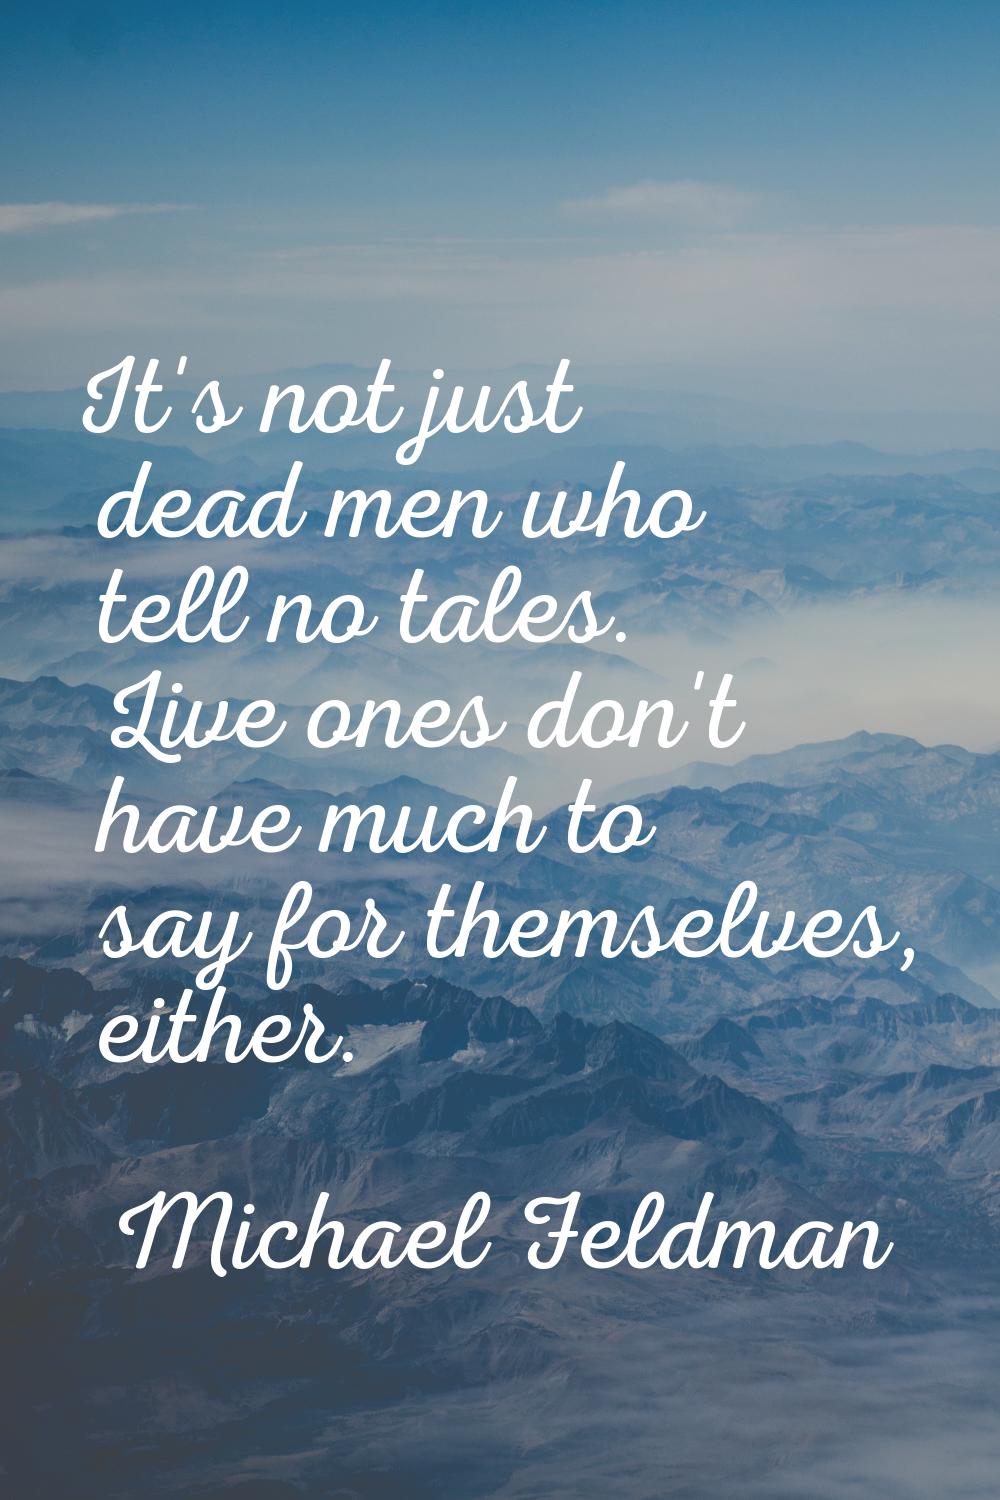 It's not just dead men who tell no tales. Live ones don't have much to say for themselves, either.